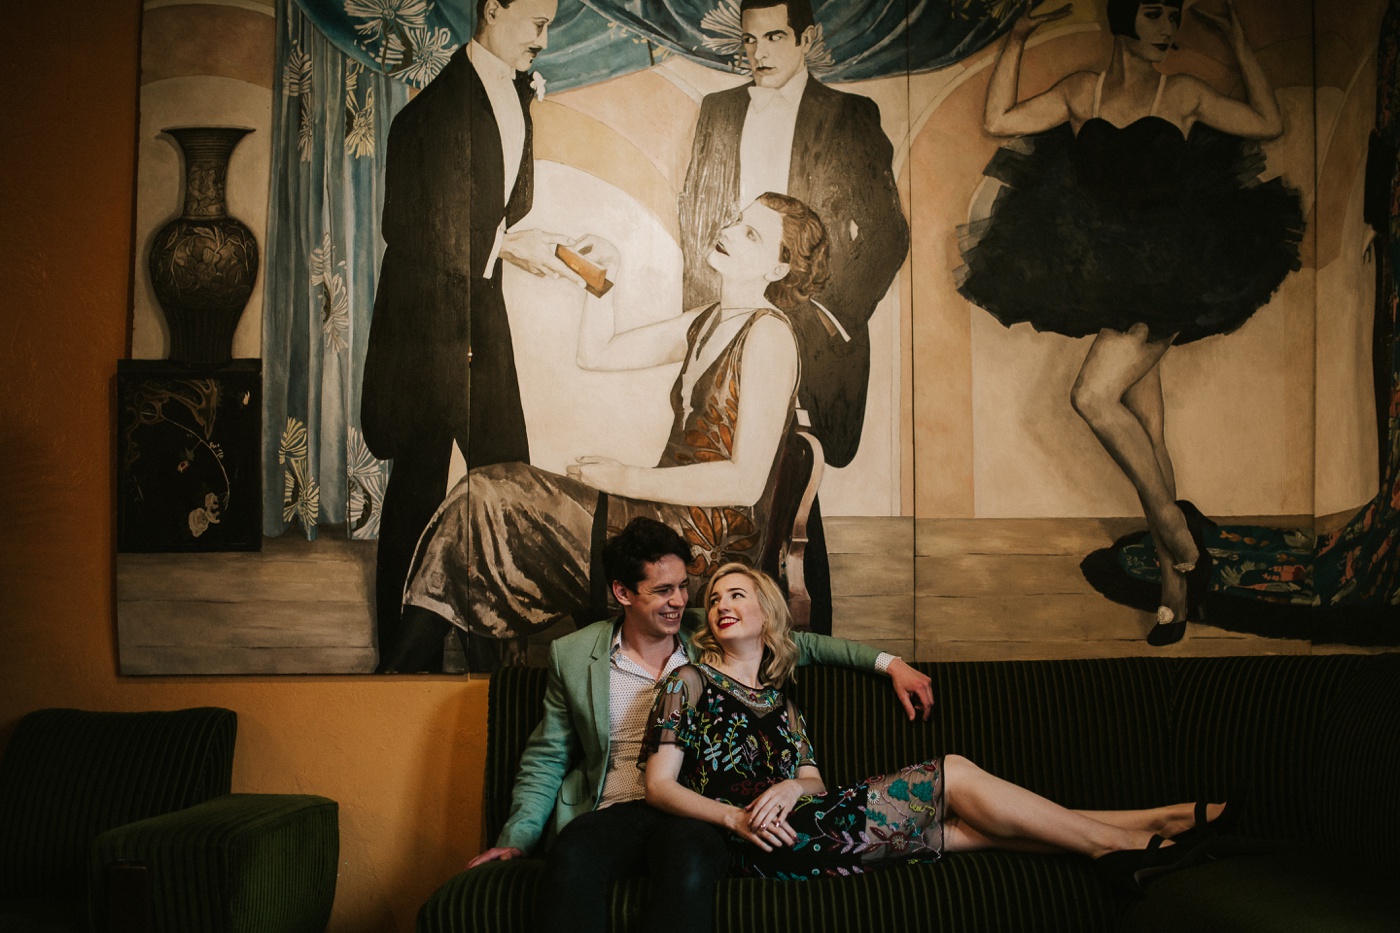 brittanytom_the-astor-quirky-fun-engagement-session_melbourne-candid-wedding-photography_17